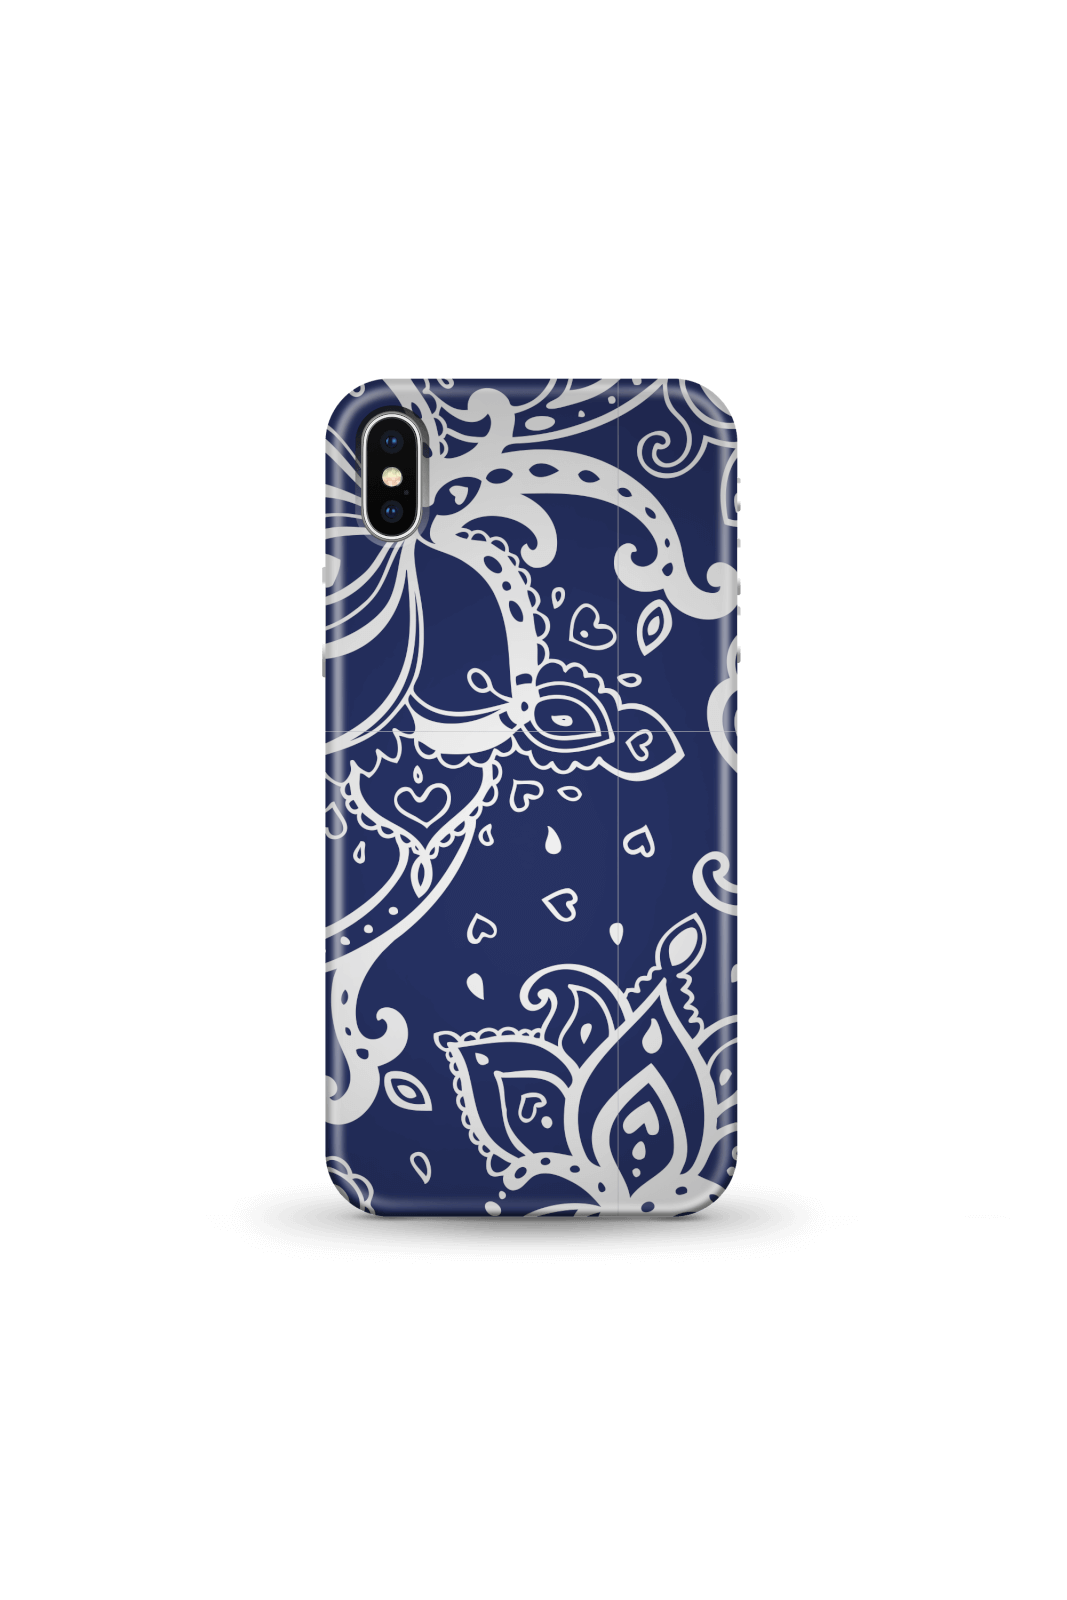 Blue Paisley Phone Case for iPhone and Android - iPhone 5/5s - Snap Case - Matte